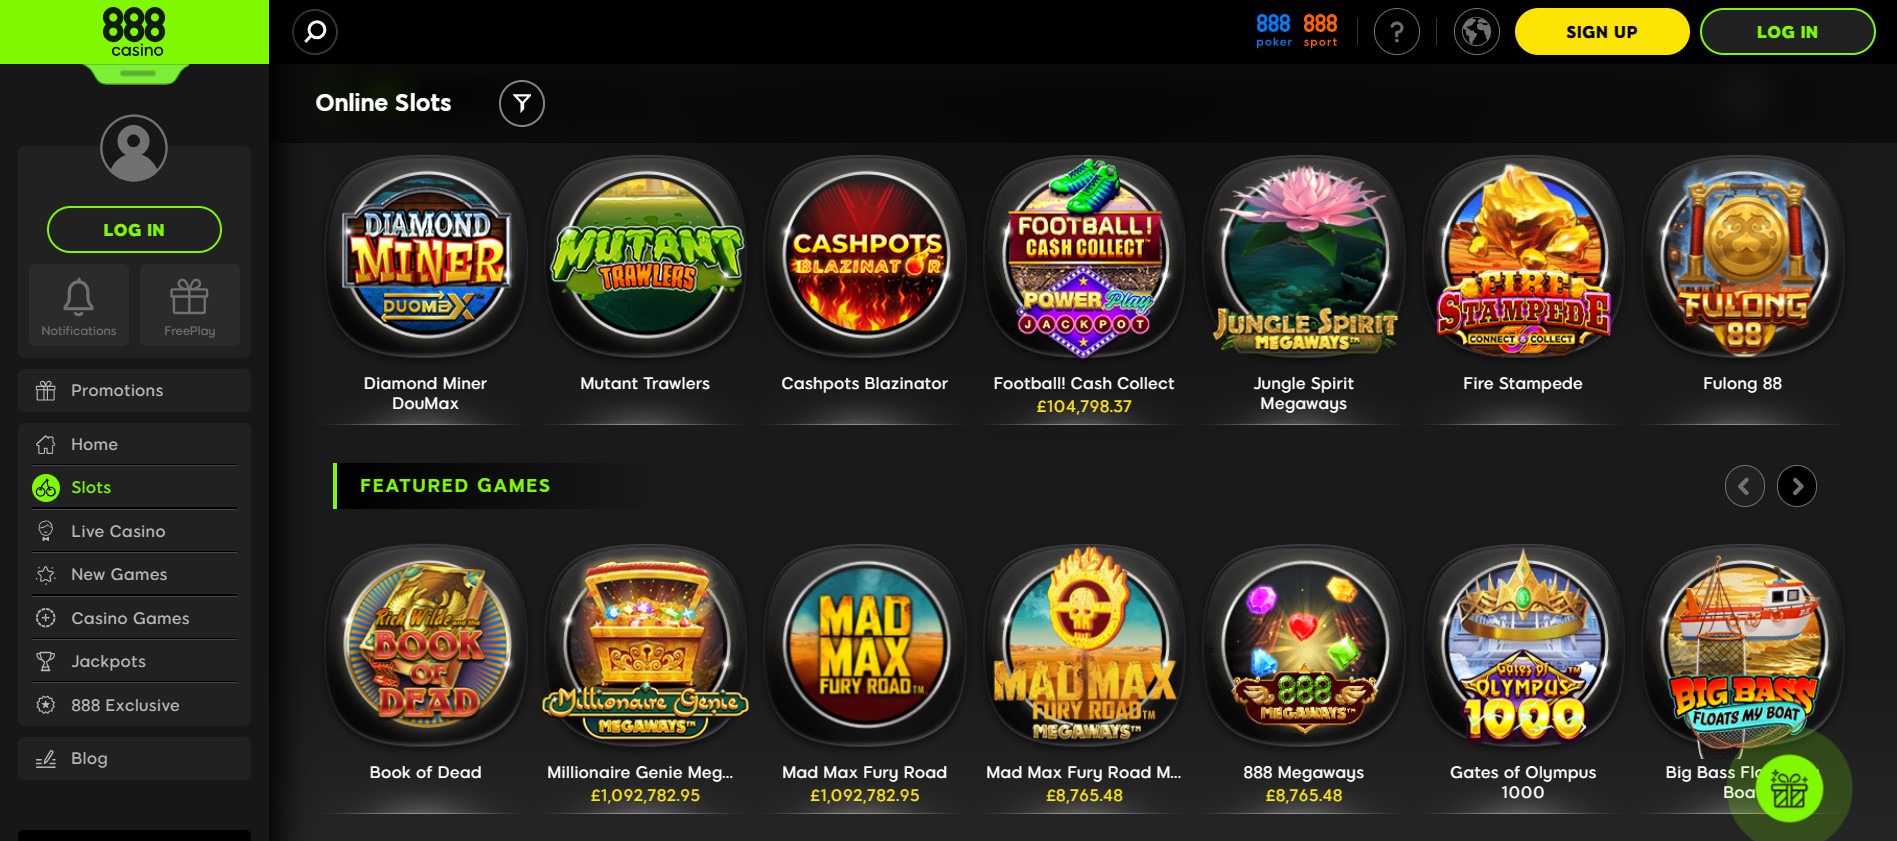 888 Casino Games Review